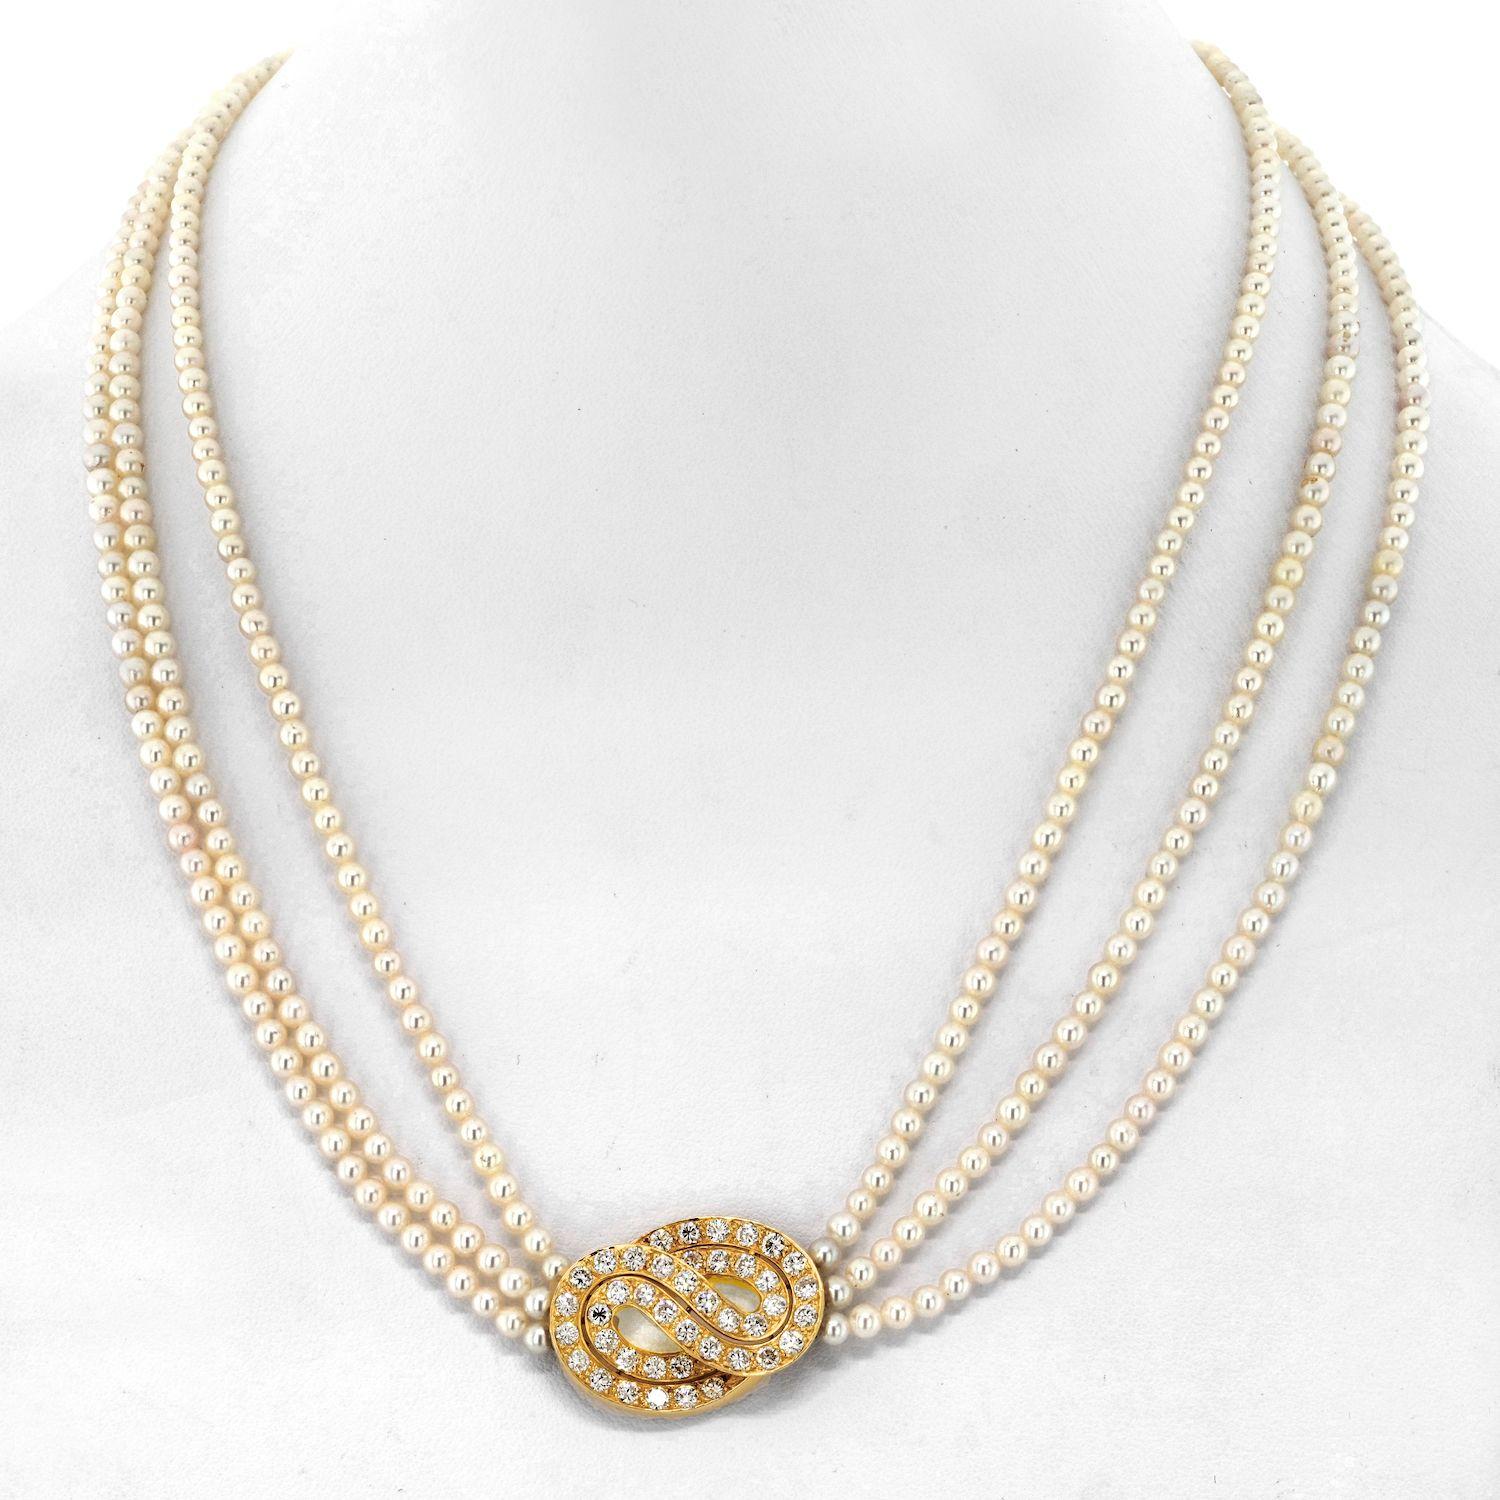 Van Cleef & Arpels 18K Yellow Gold Multistrand Pearl Diamond Necklace In Excellent Condition For Sale In New York, NY